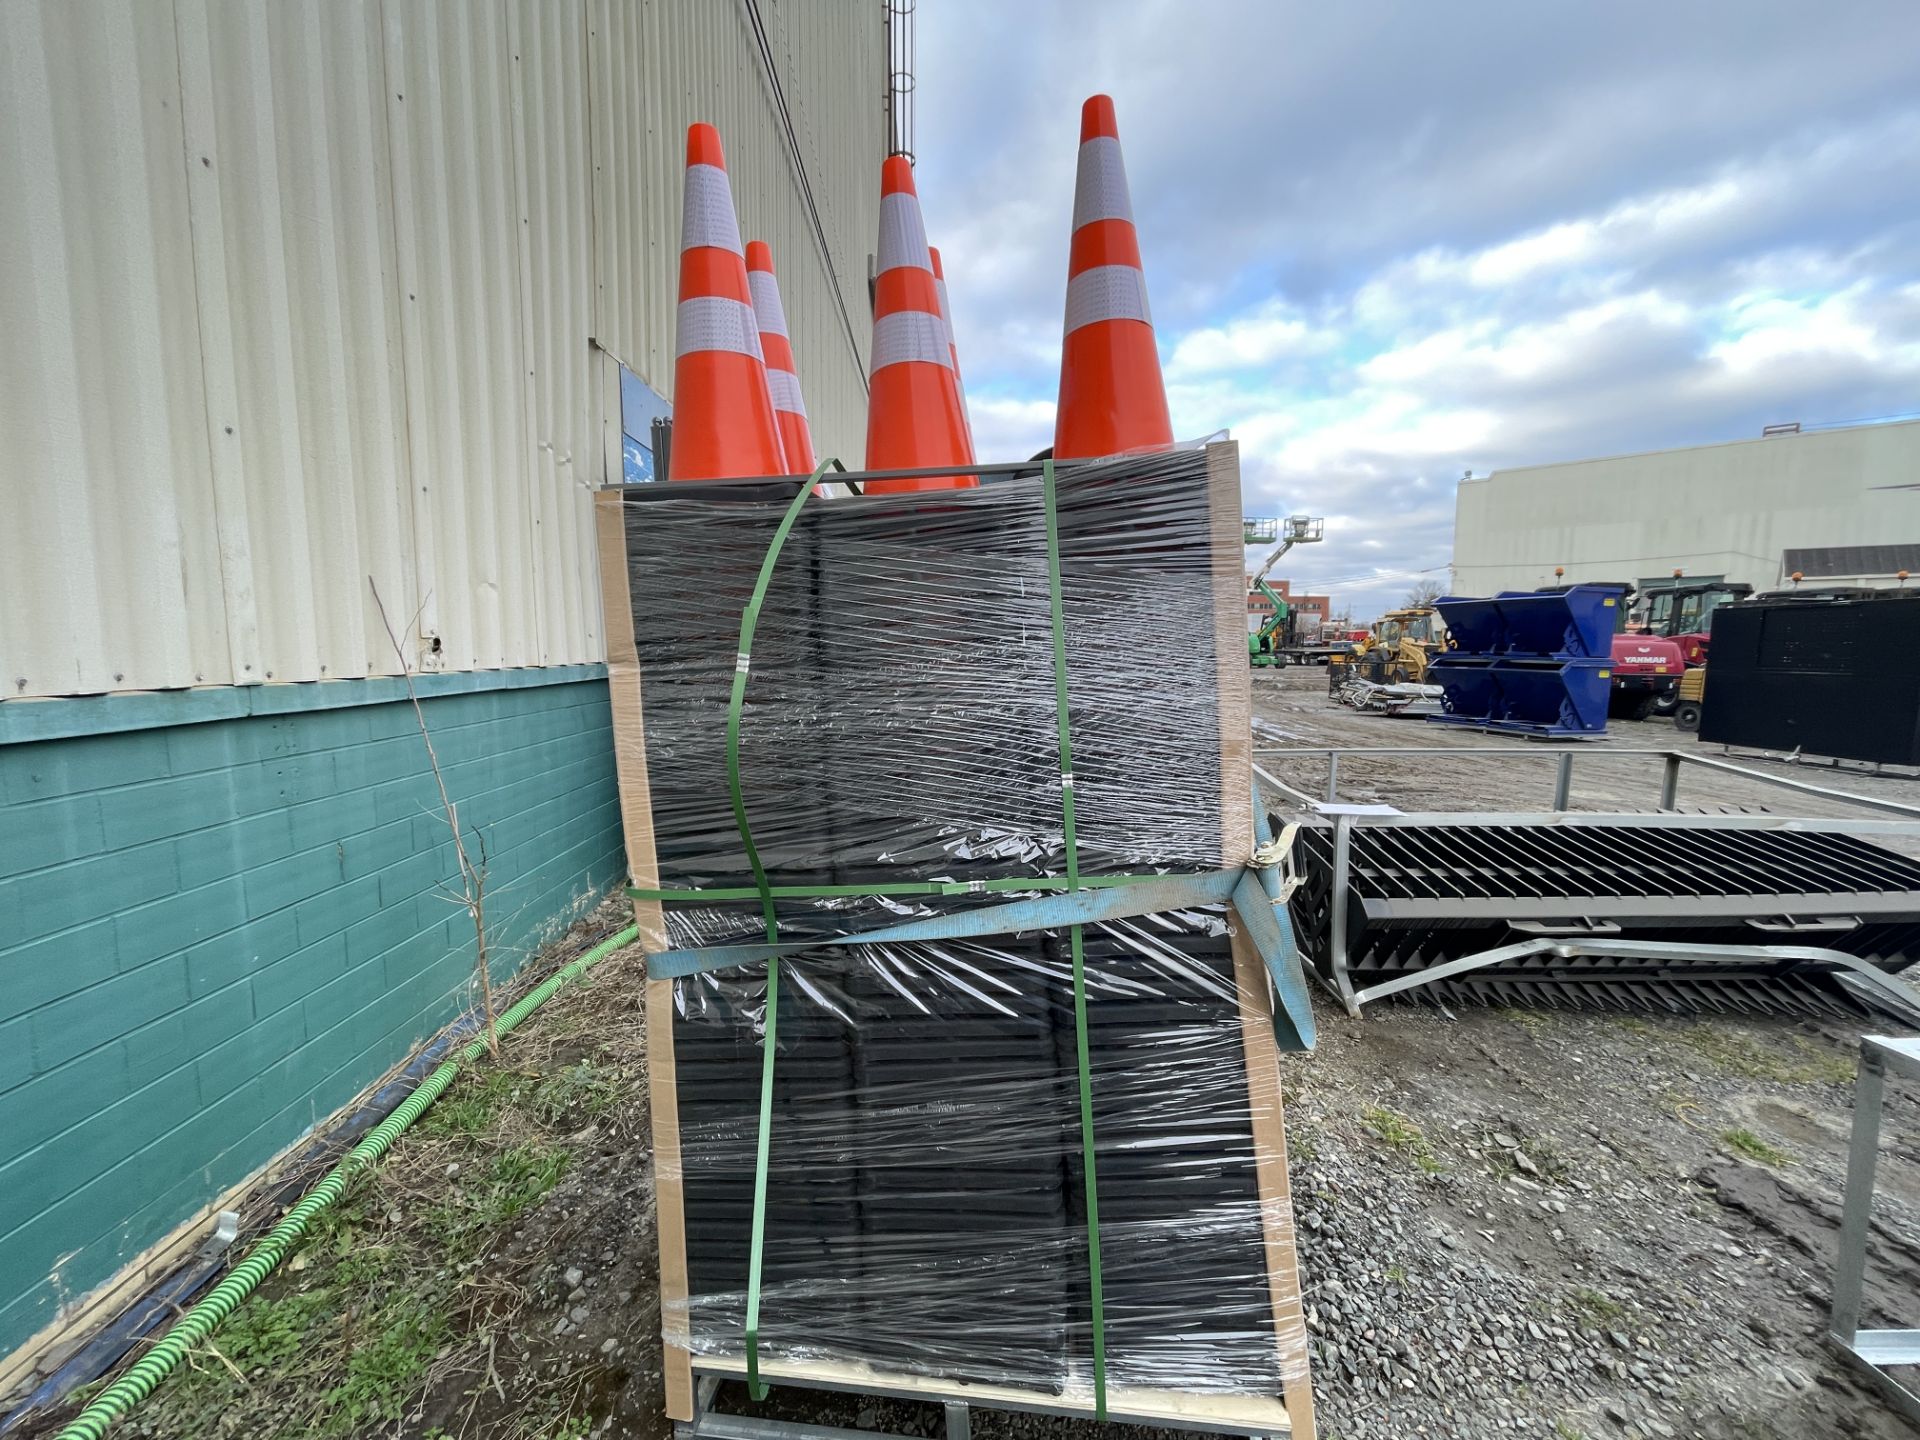 Brand New Lot of 250 Safety Highway Cones (NY244) - Image 3 of 6